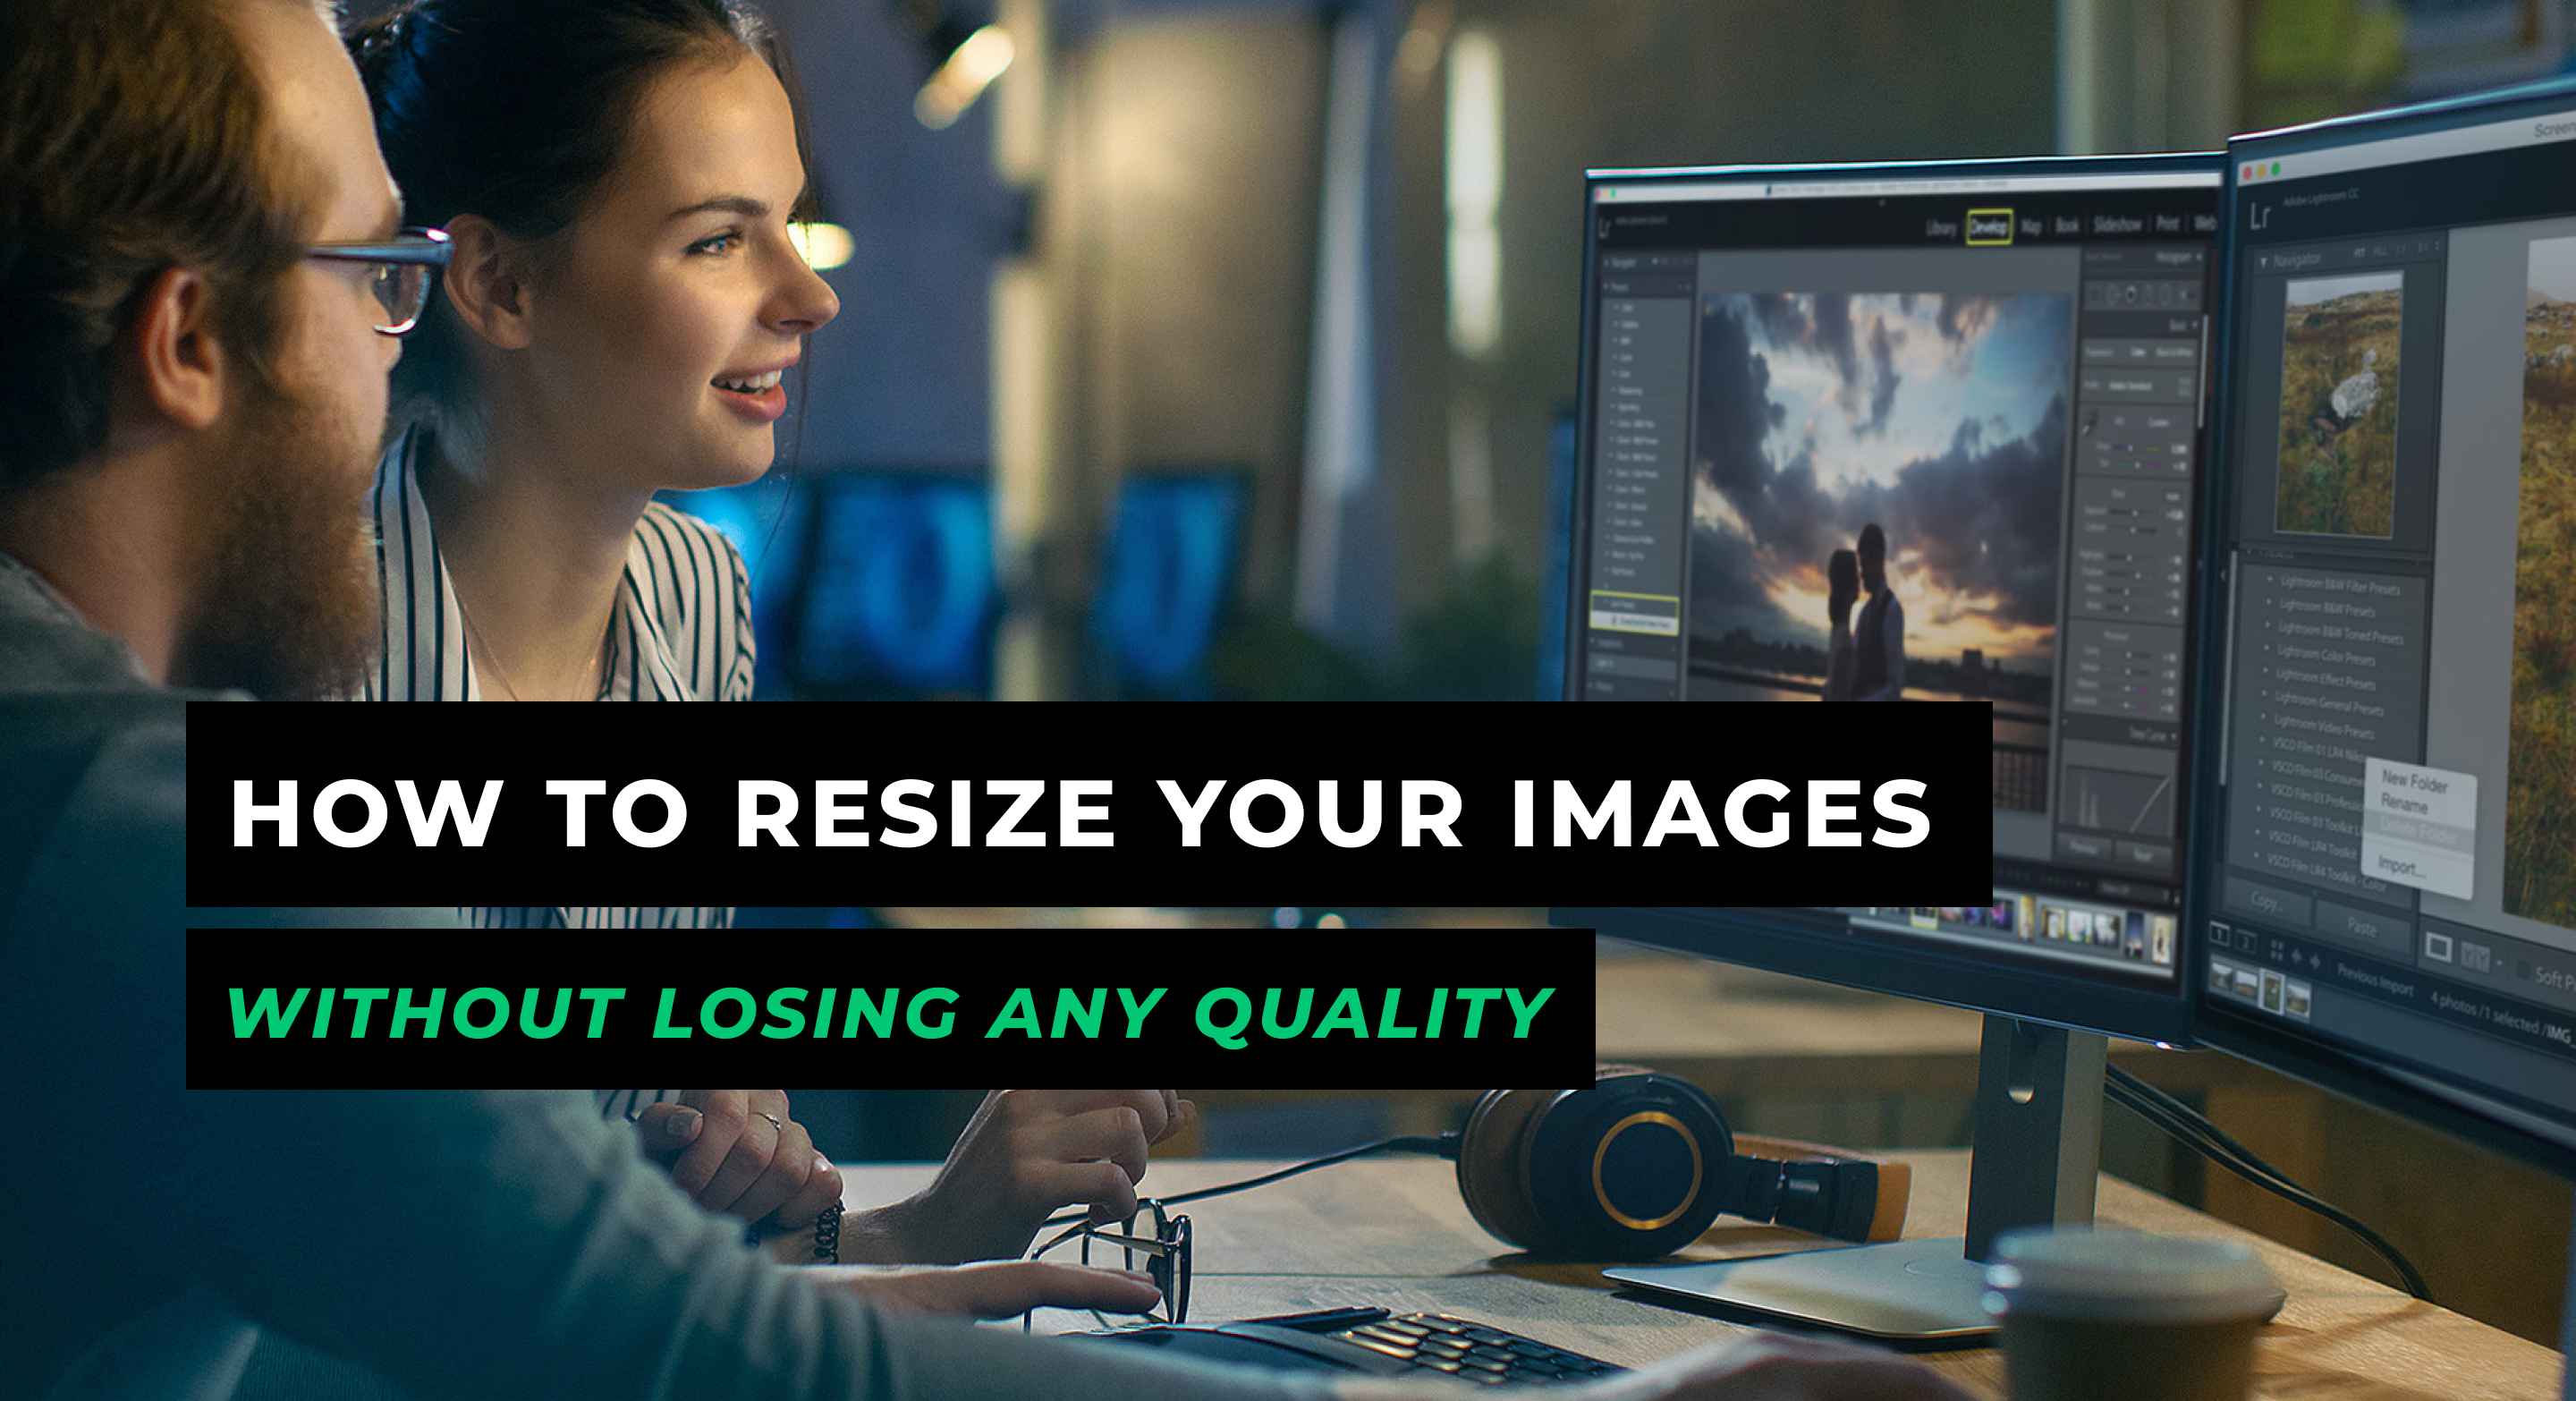 optimize images without losing quality